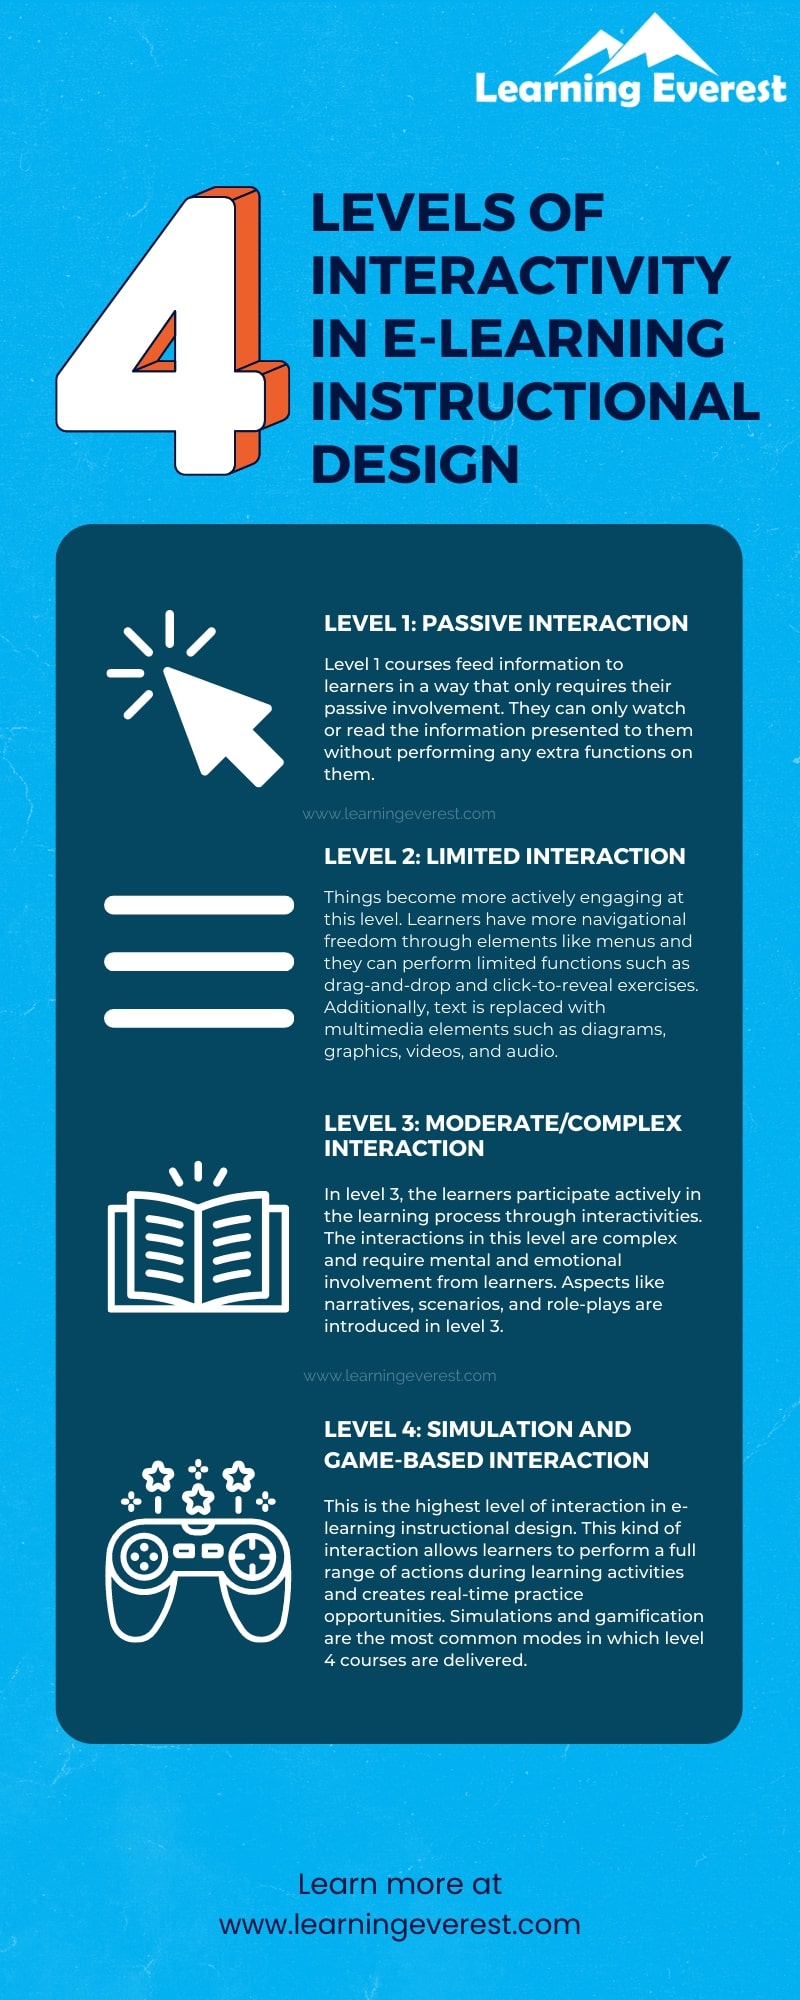 4 Levels of Interactivity in elearning Instructional Design